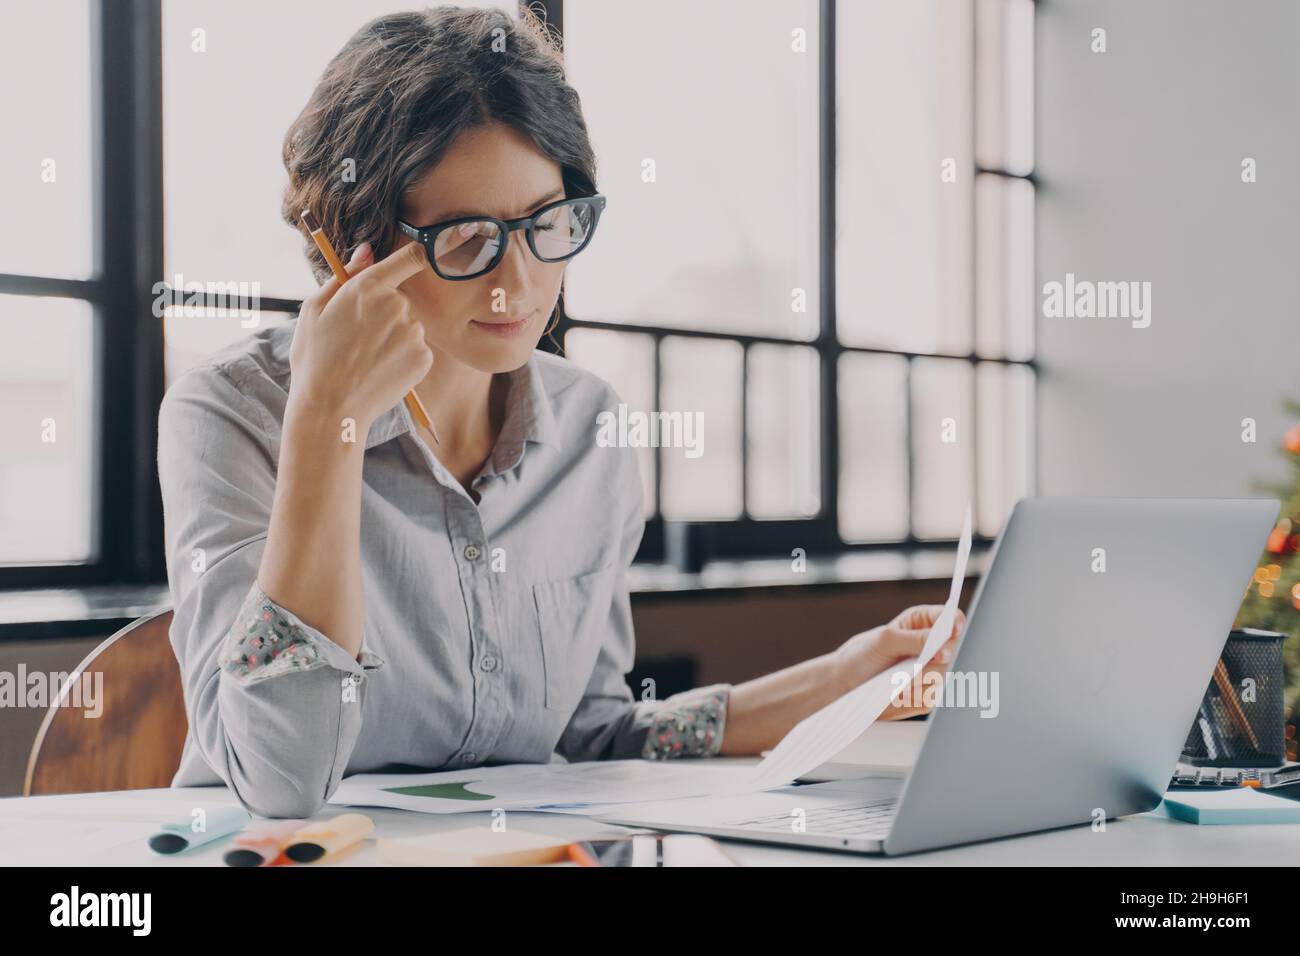 Businesswoman in glasses feeling tired, suffering from eye strain and fatigue during computer work Stock Photo